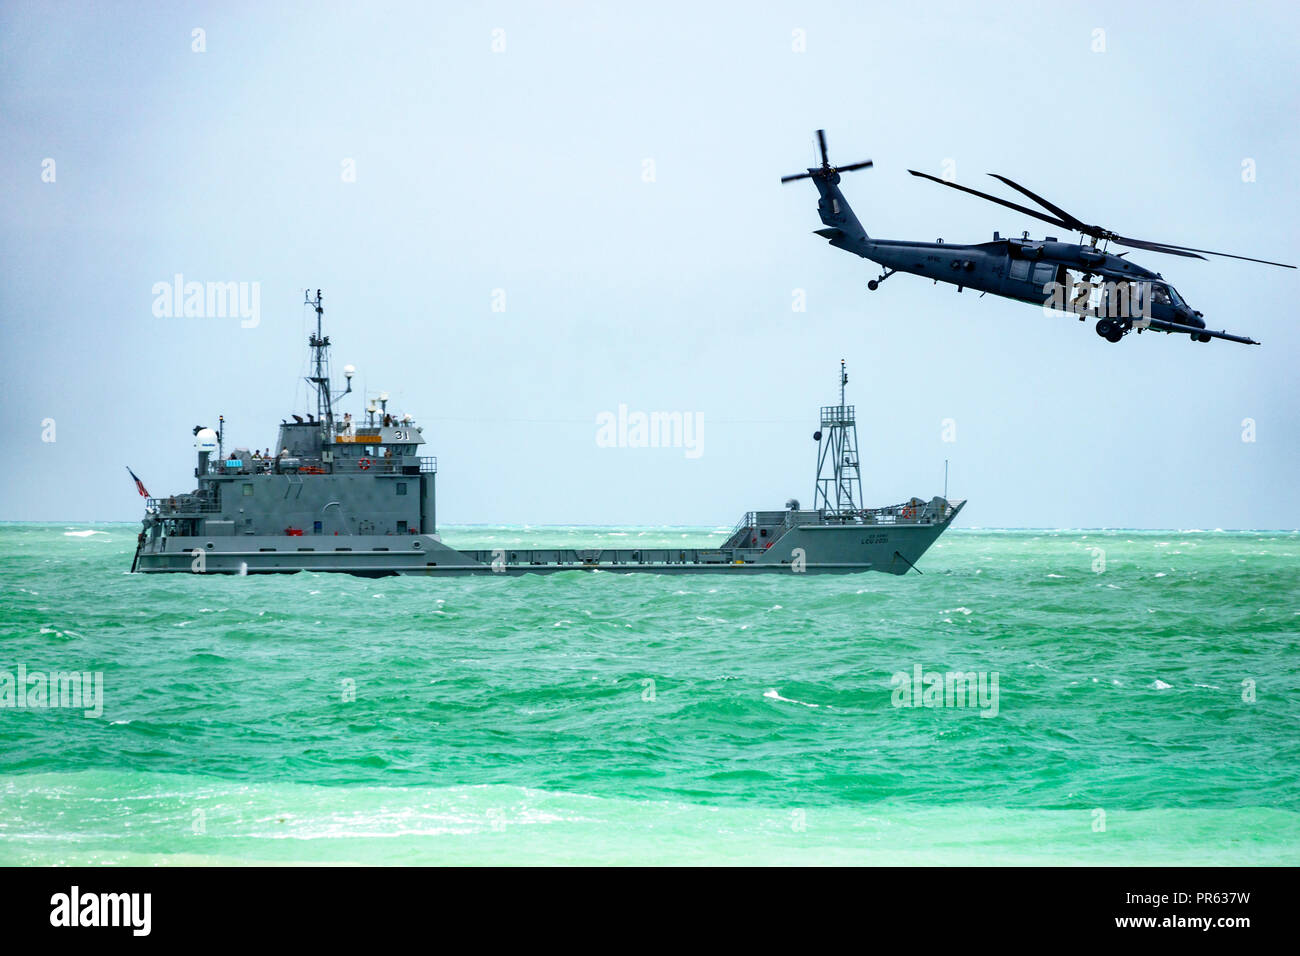 Miami Beach, Florida, National Salute to America's Heroes Air & Sea Water Show, Sikorsky MH-60G/HH-60G Pave Hawk Helikopter mit Twin-Turbowelle, Atlant Stockfoto